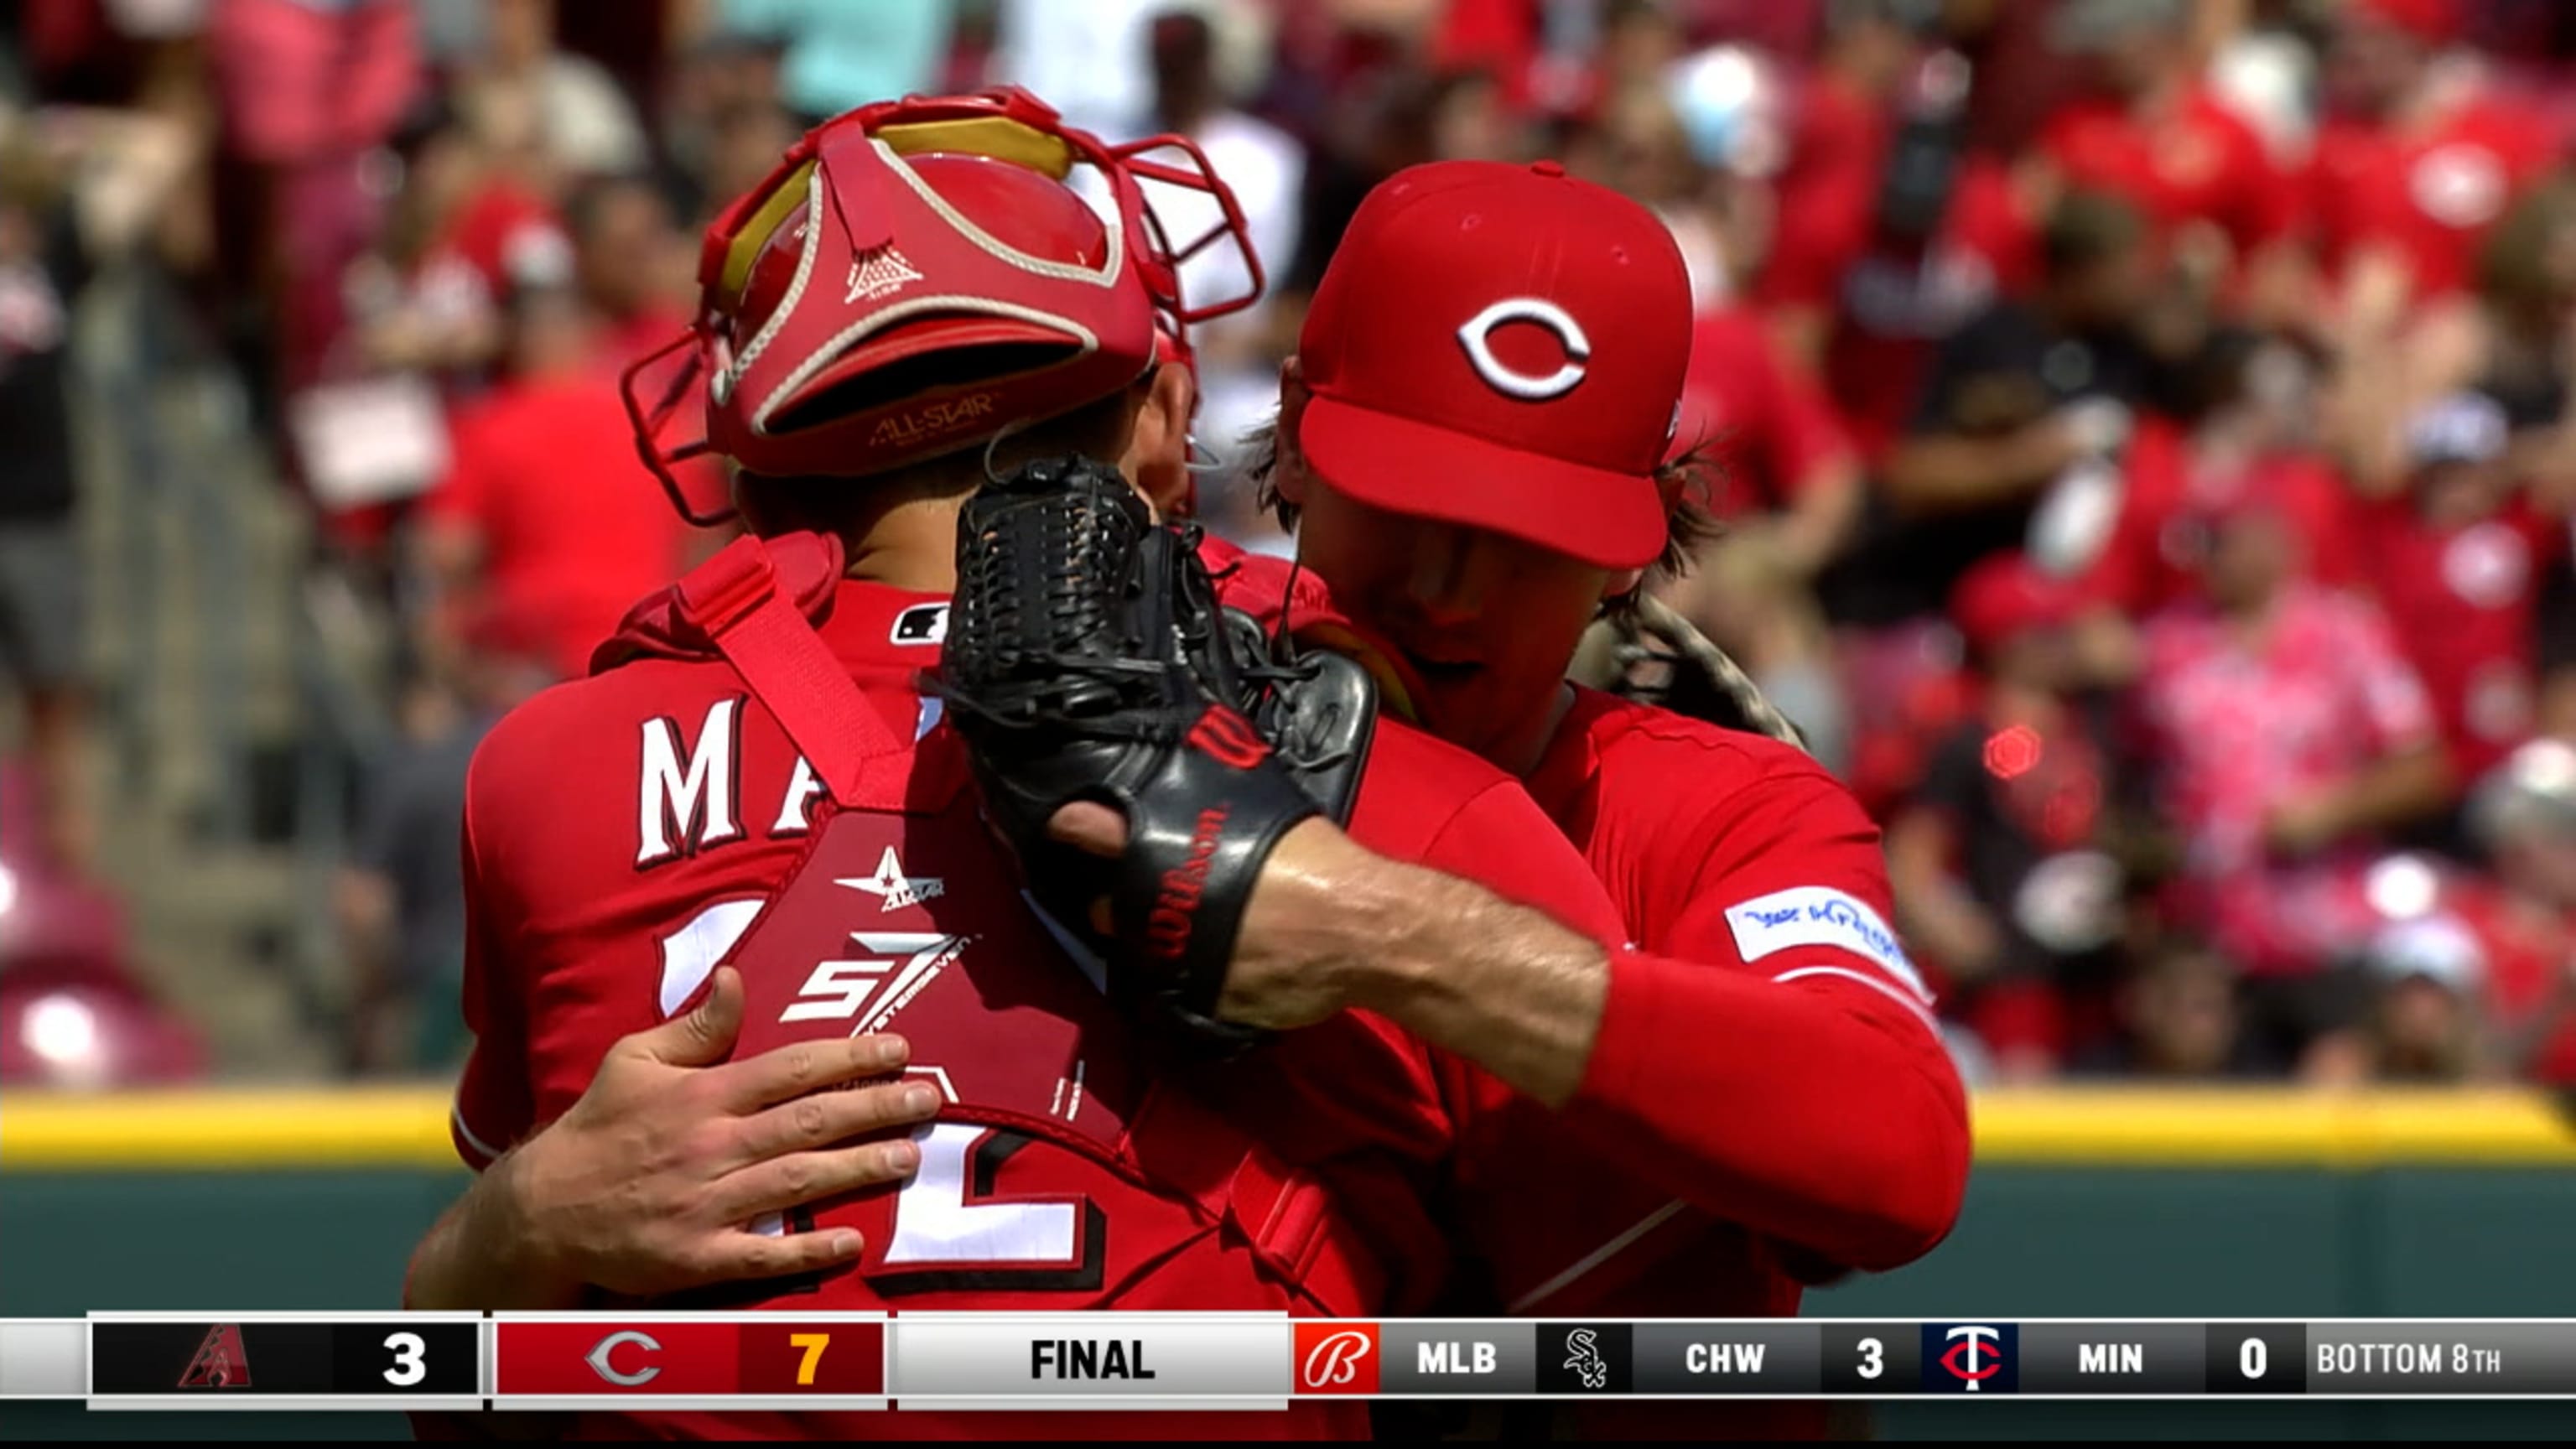 8 straight! Cincinnati Reds sweep defending champs, head home on a roll